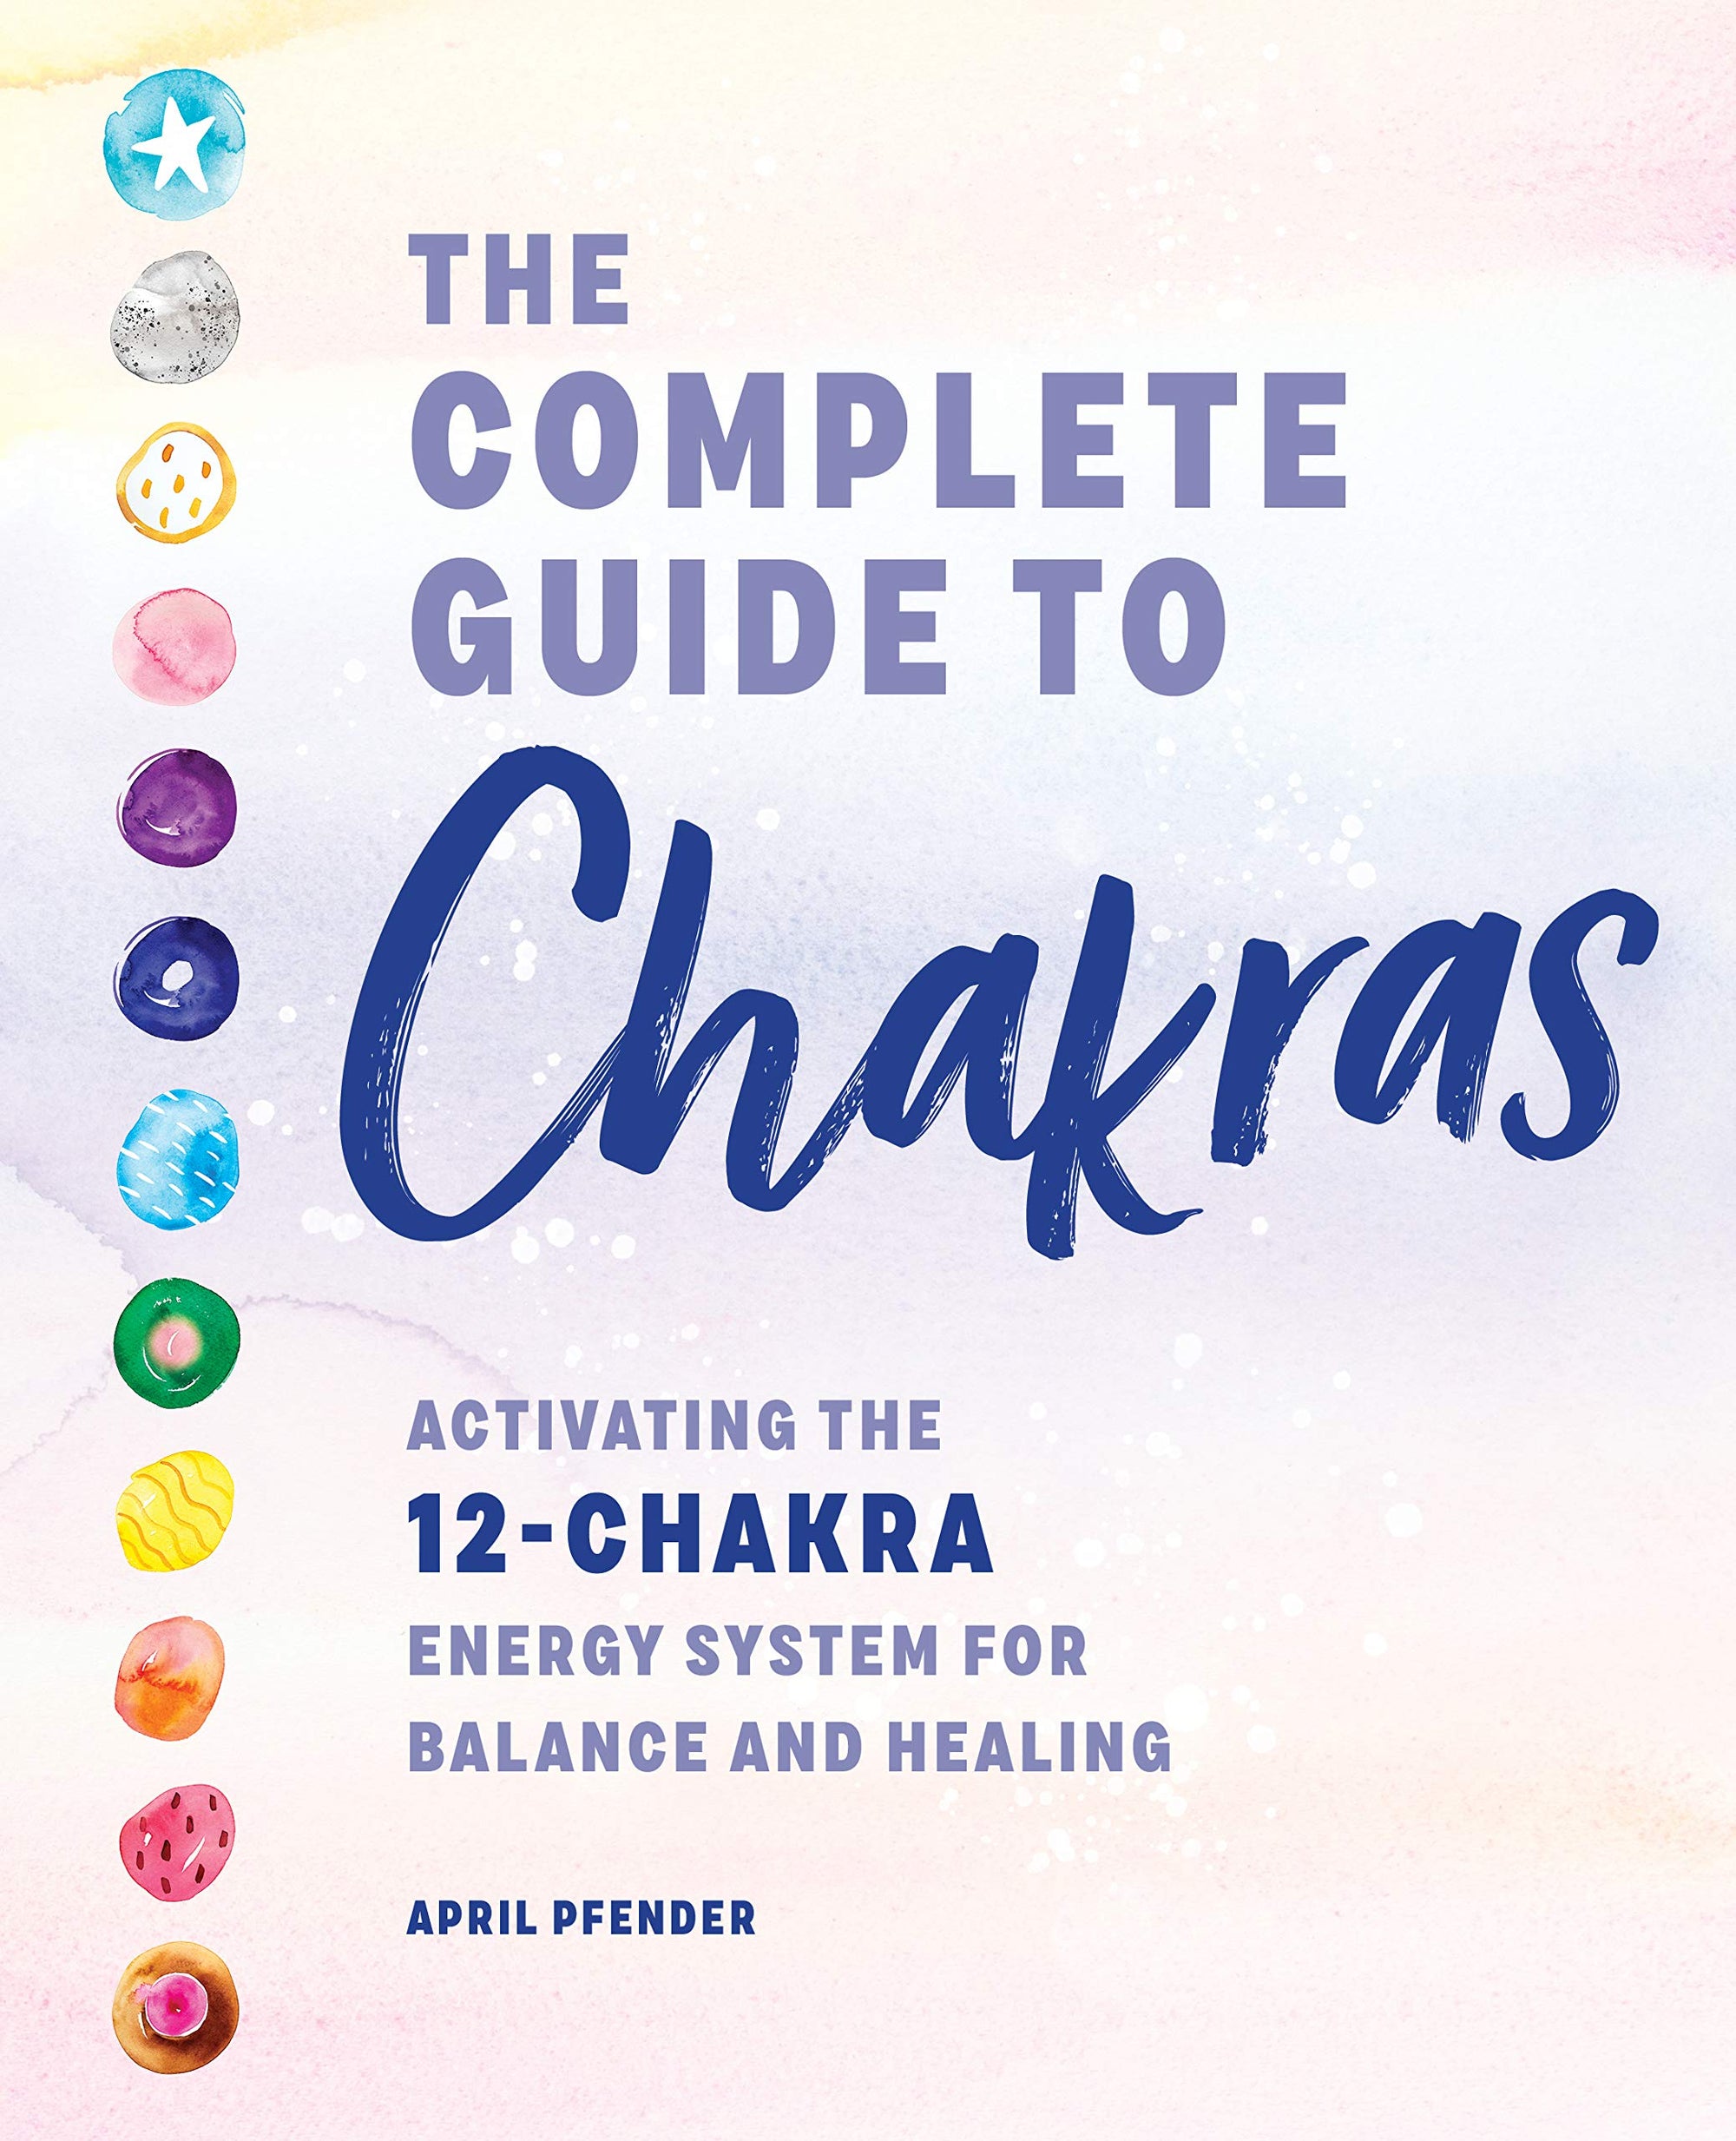 The Complete Guide to Chakras: Activating the 12-Chakra Energy System